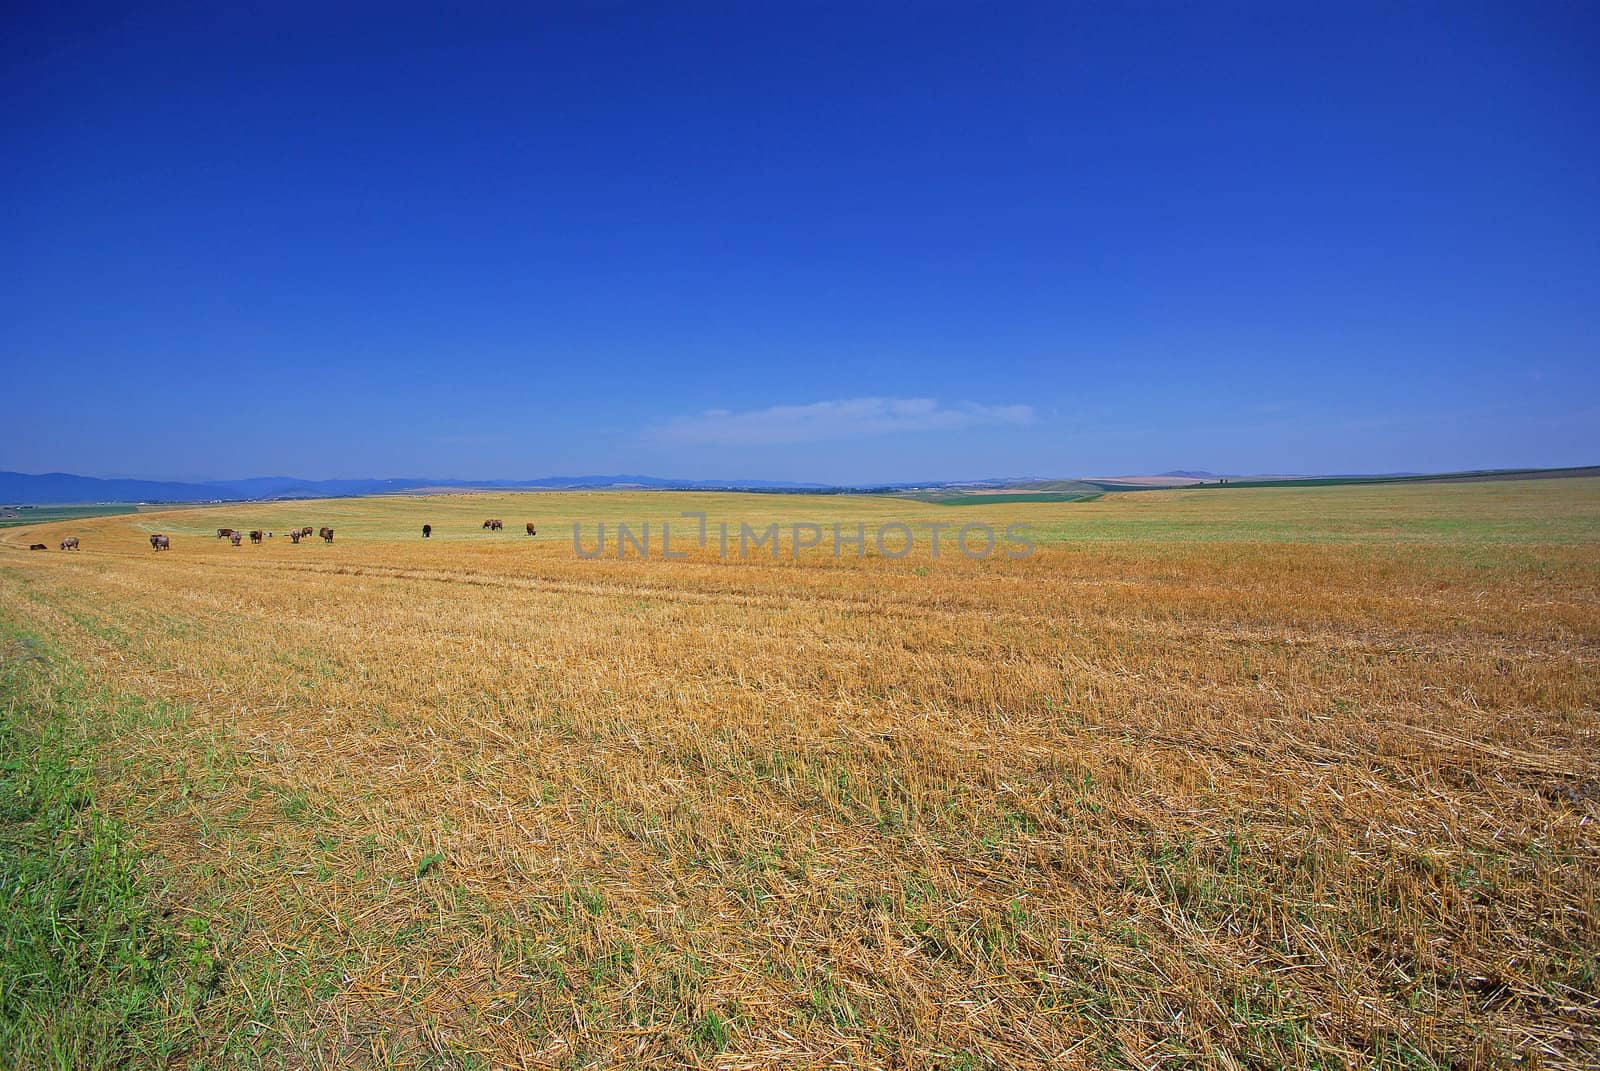 Image taken after harvesting on a wheat field